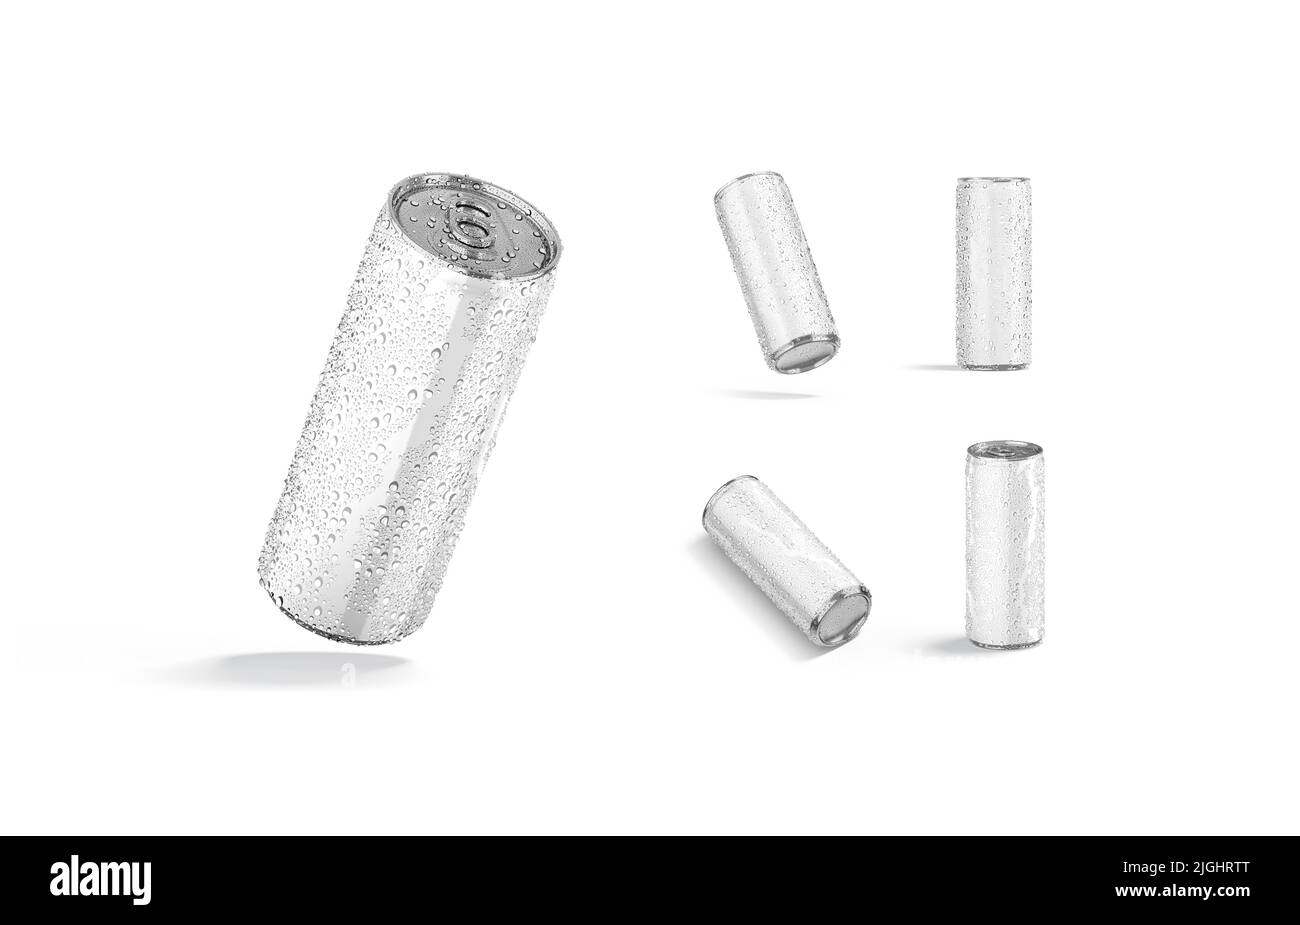 Blank white aluminum 500 ml soda can mockup, different views Stock Photo